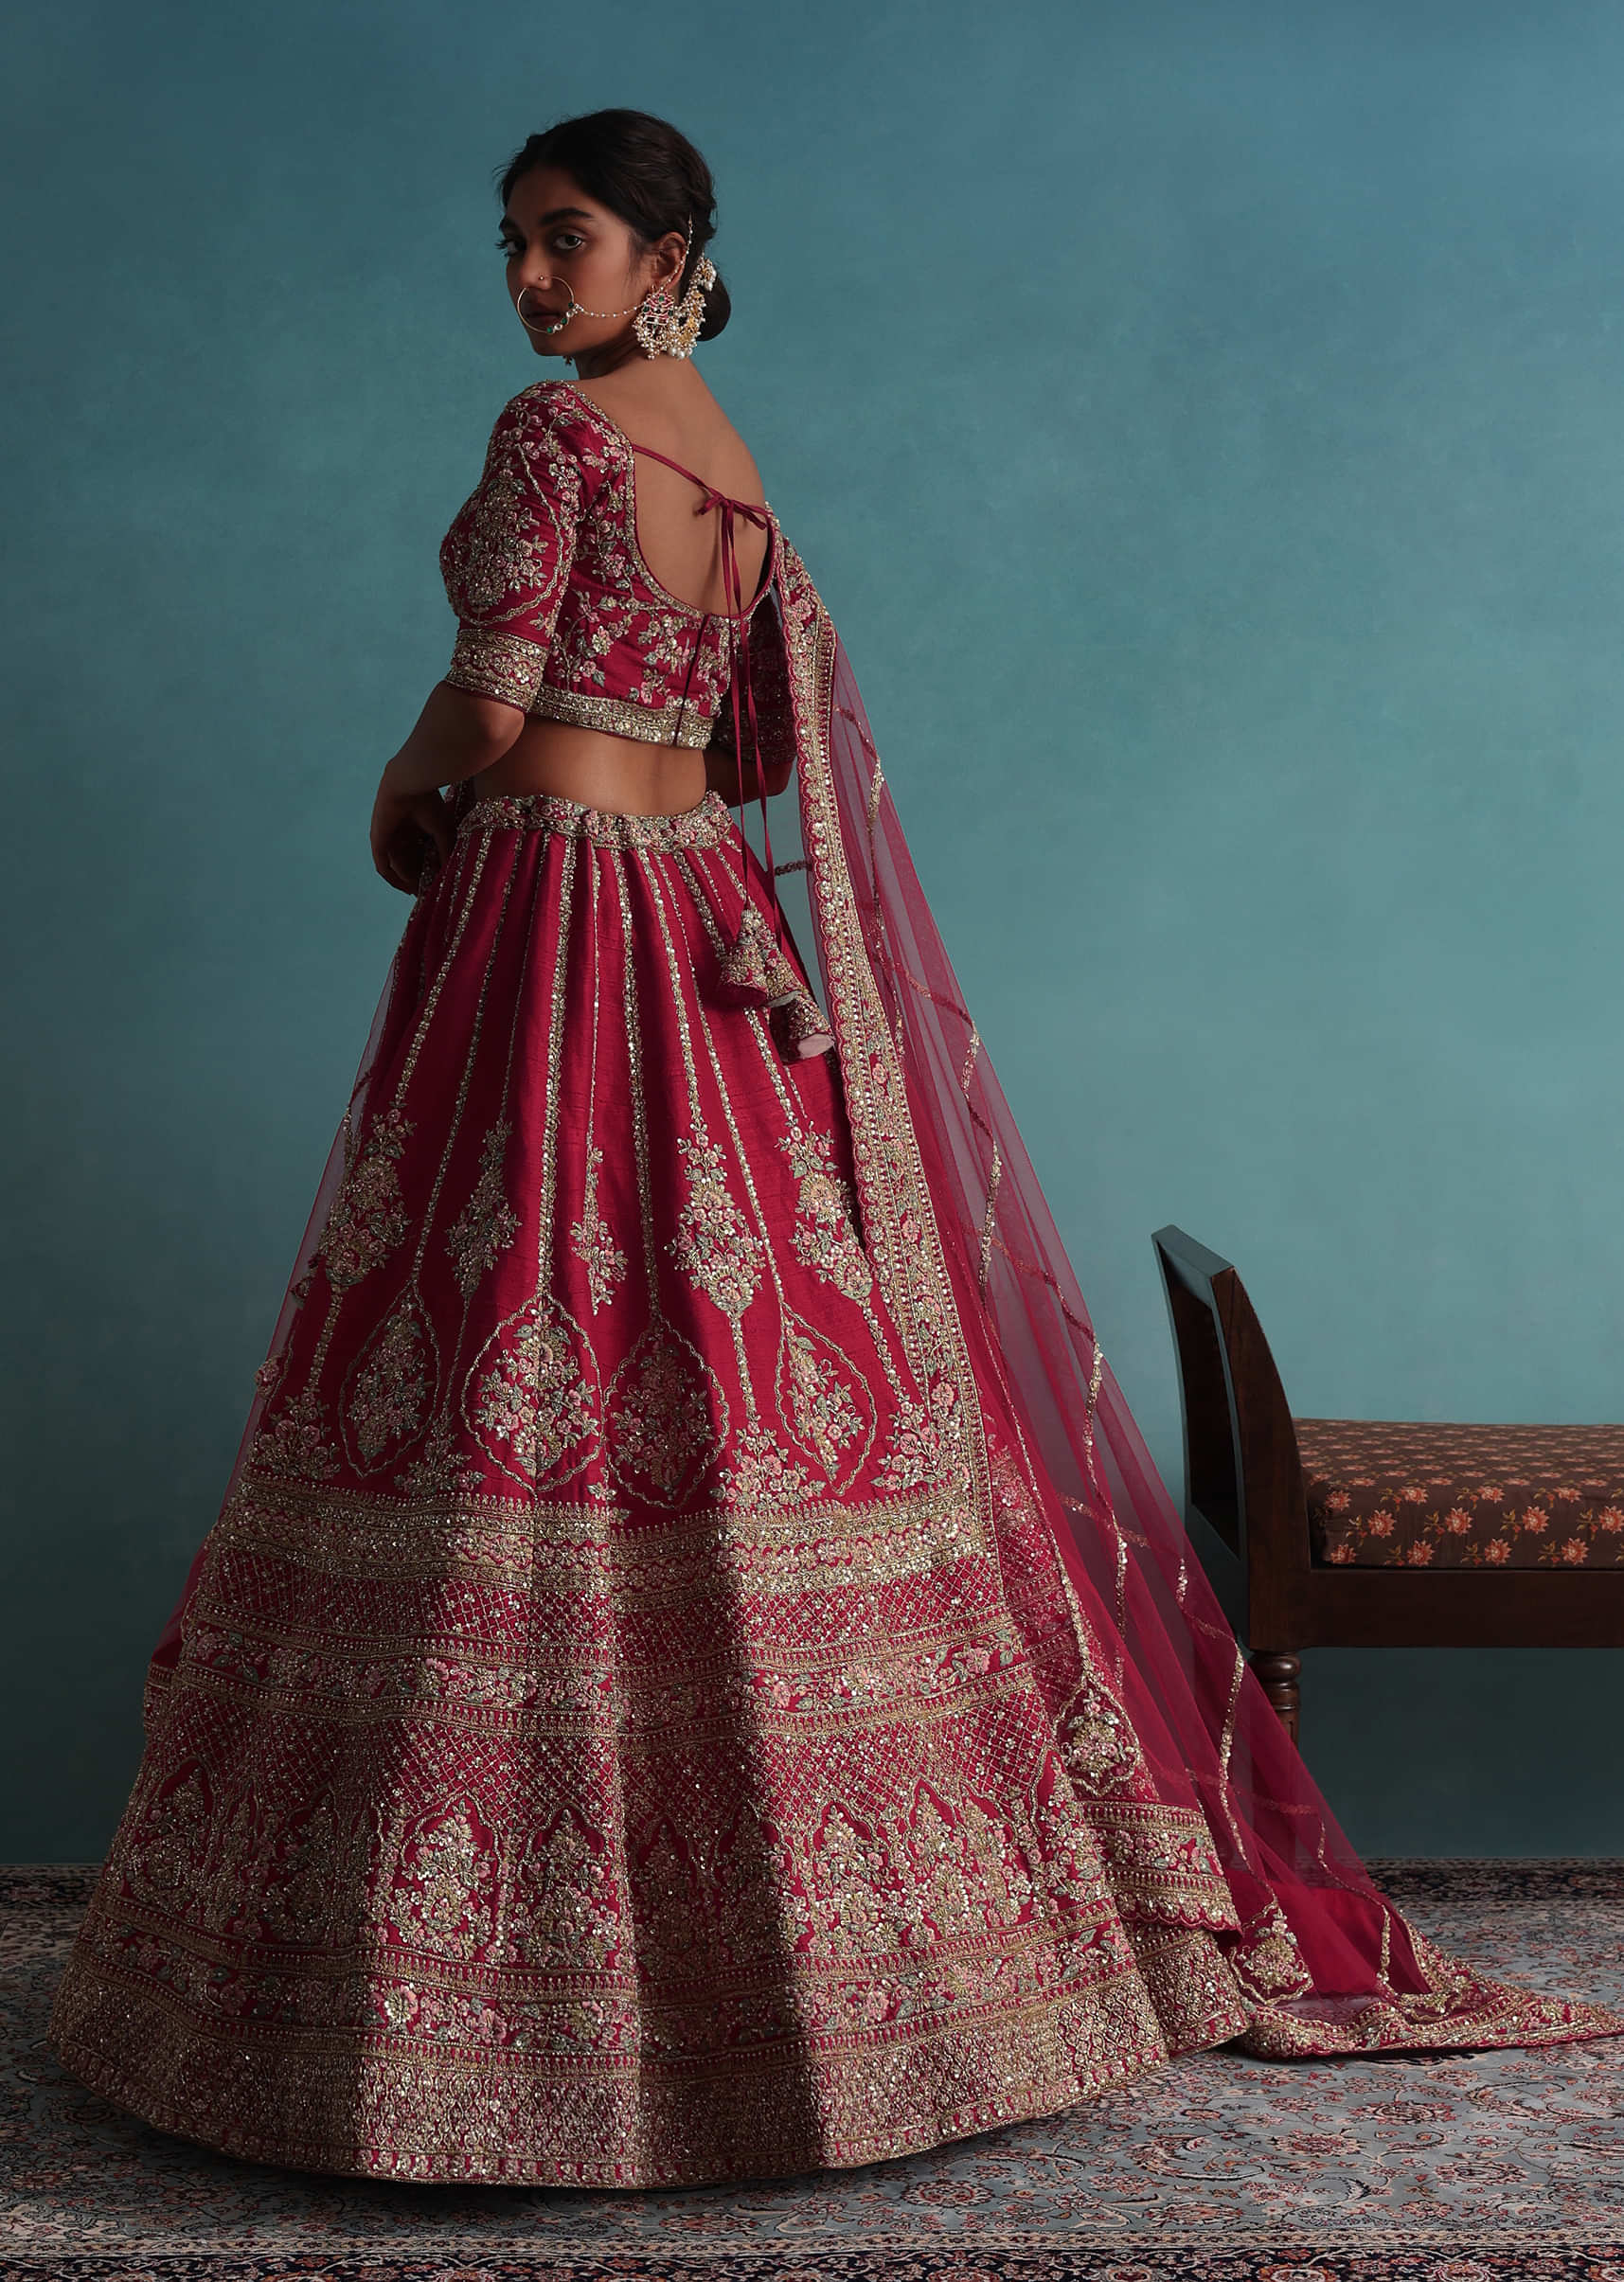 Tomato Red Embroidered 16 Kali Bridal Lehenga In Raw Silk With Floral Hand Embroidery